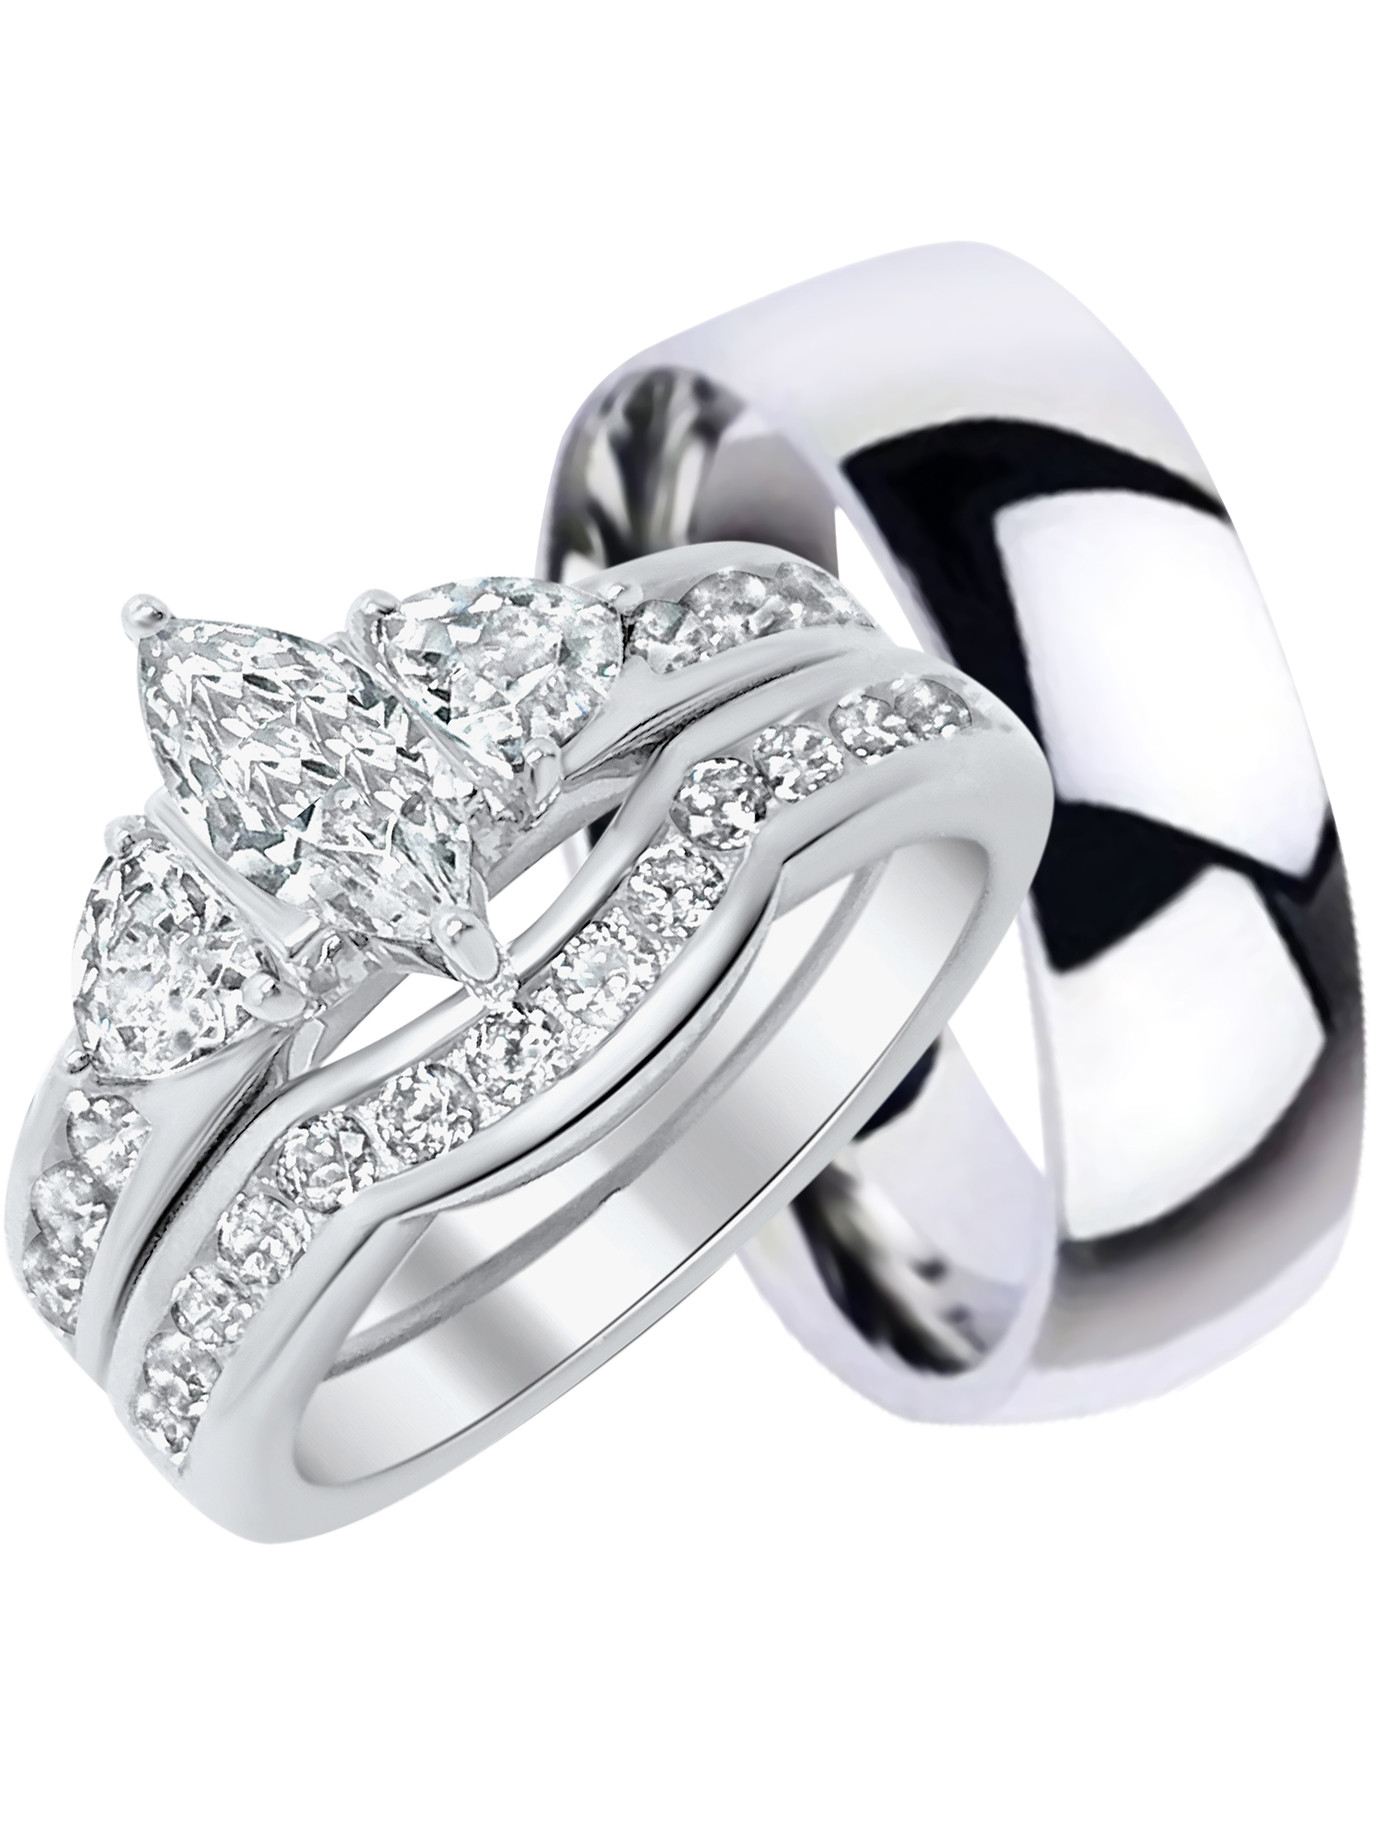 Sterling Silver Wedding Bands For Him
 His and Hers Wedding Ring Set Matching Trio Wedding Bands